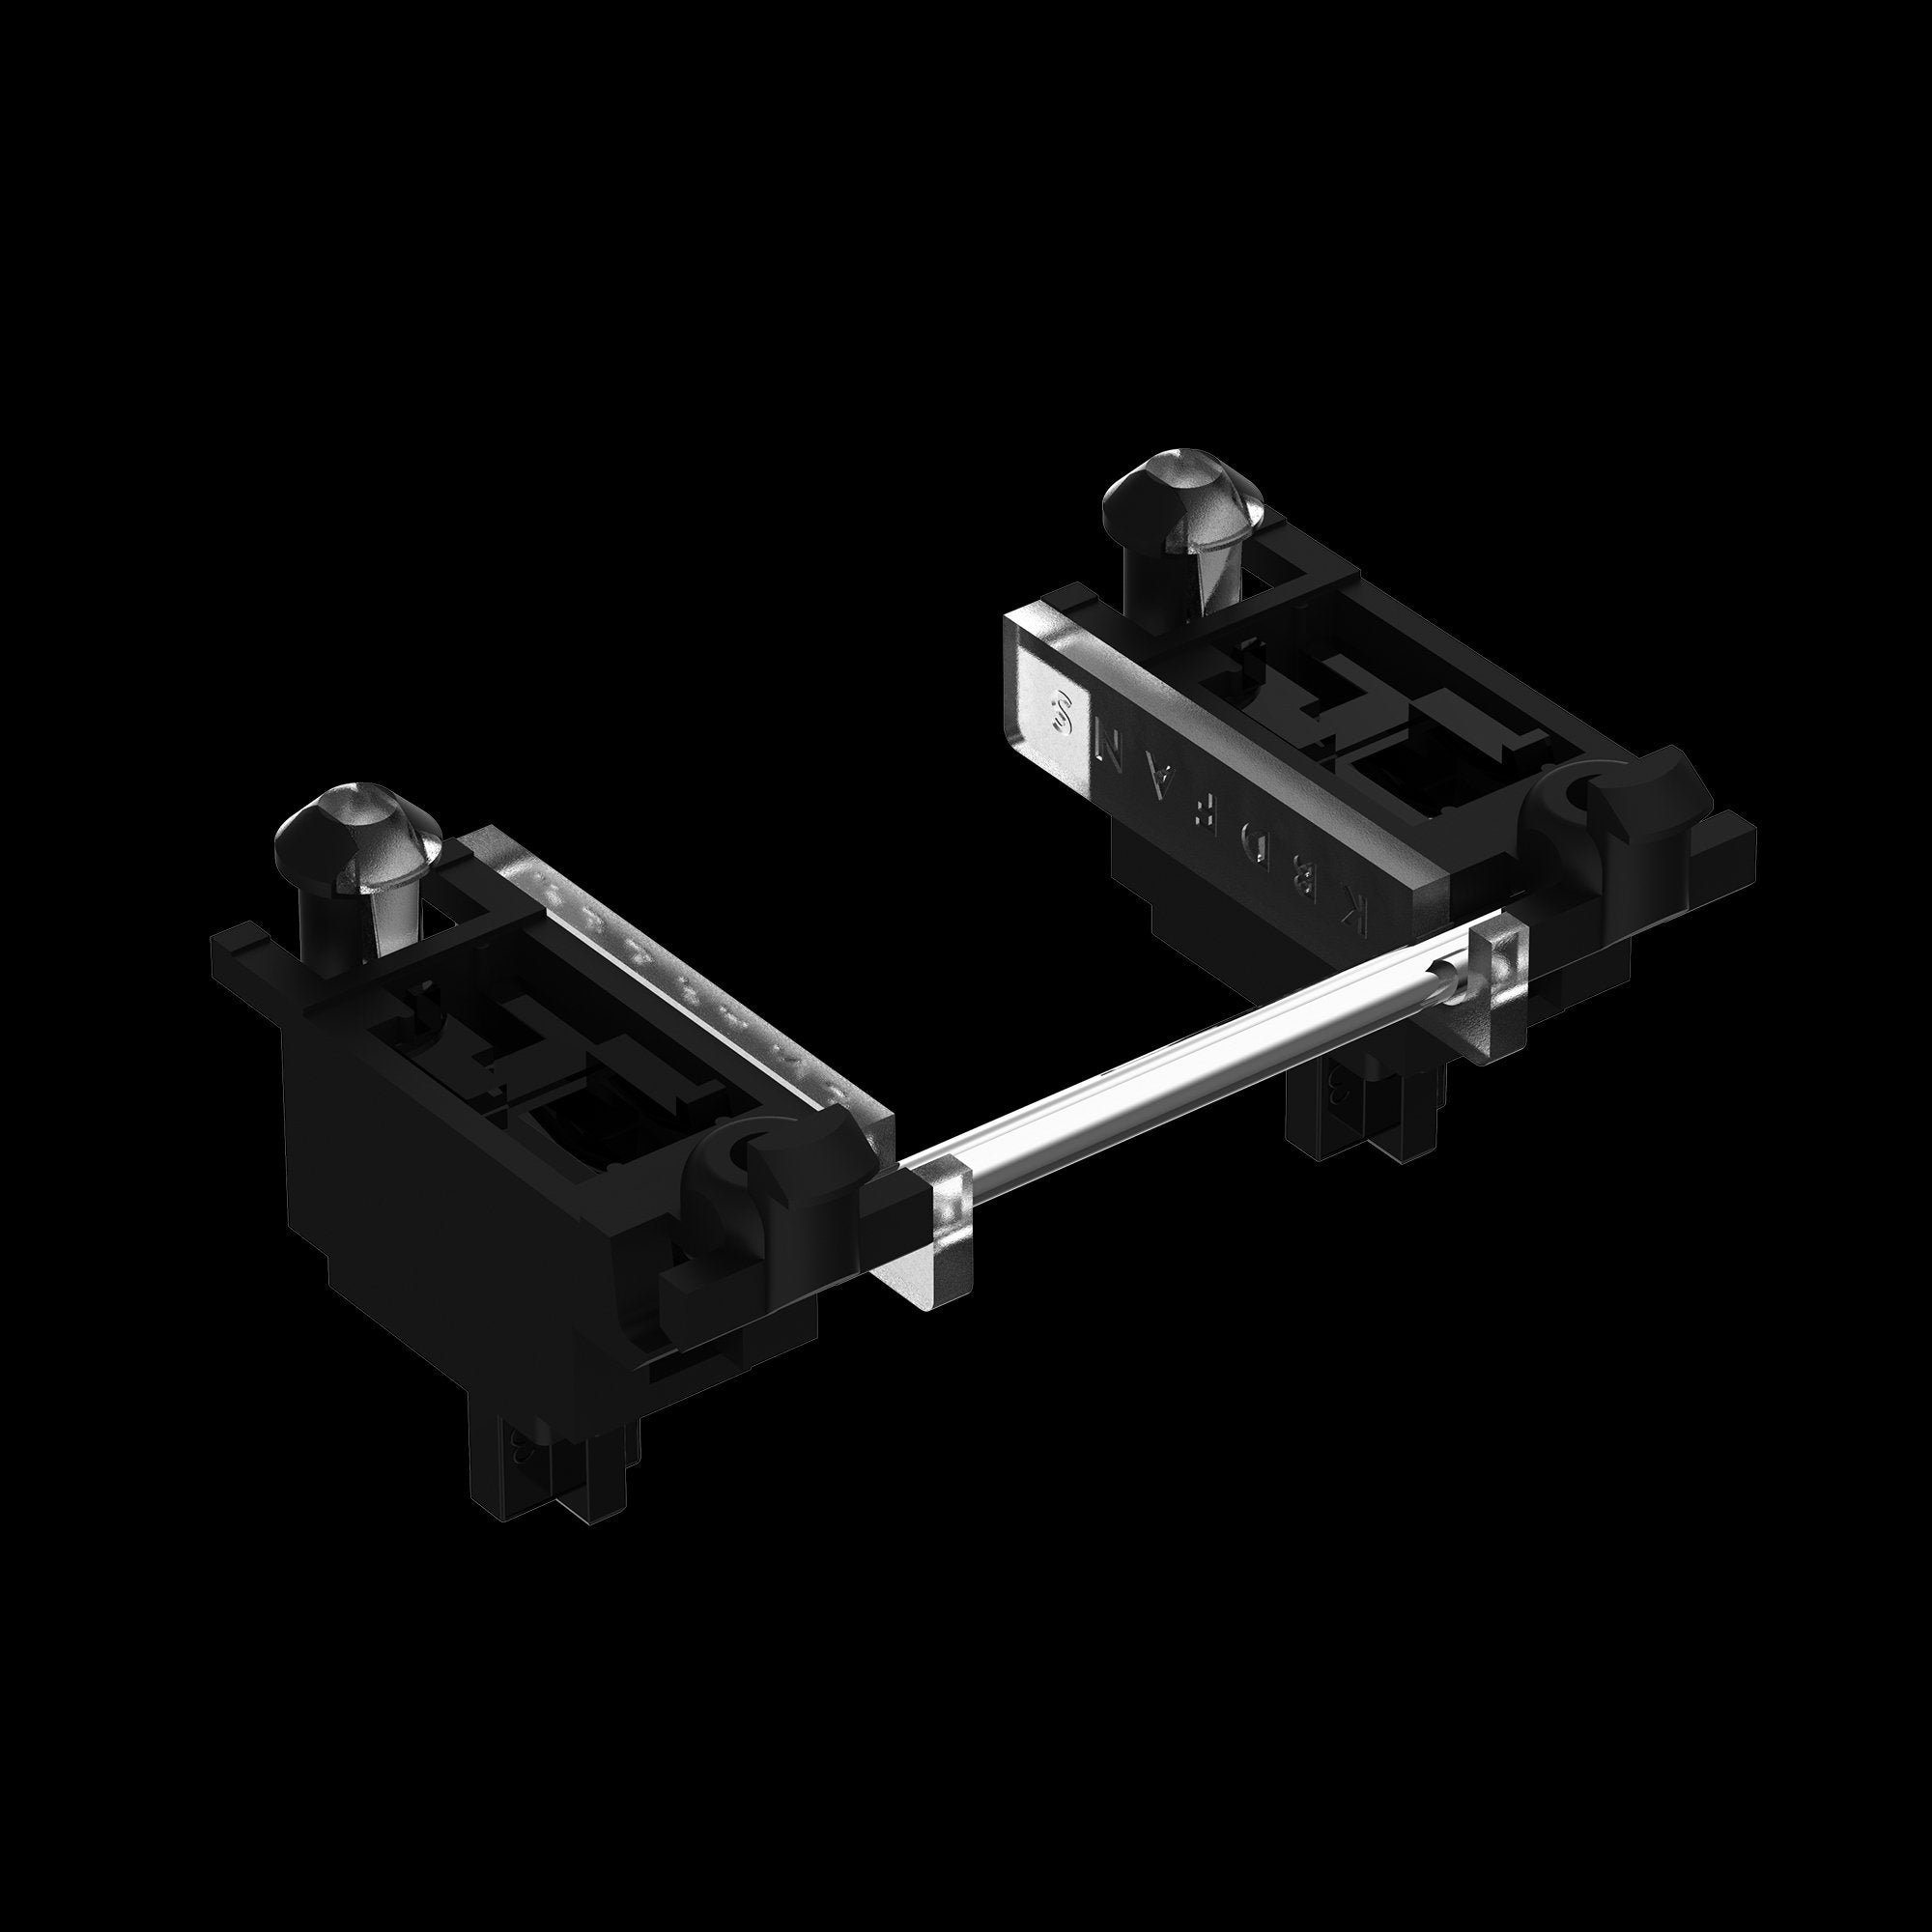 PCB Mount Stabilizer Support by KBDfans